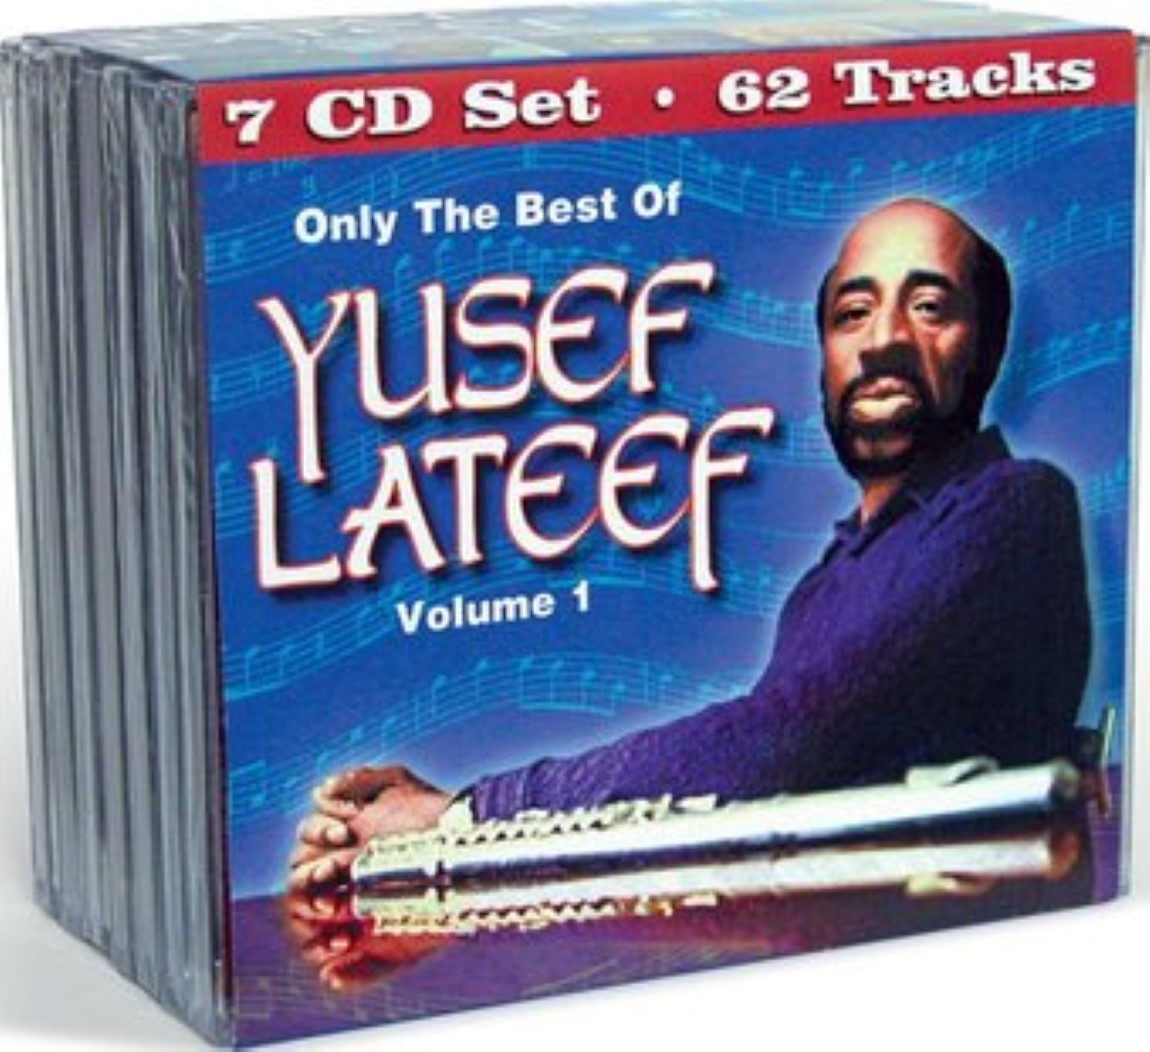 Only The Best Of Yusef Lateef, Volume 1 (7 CD)